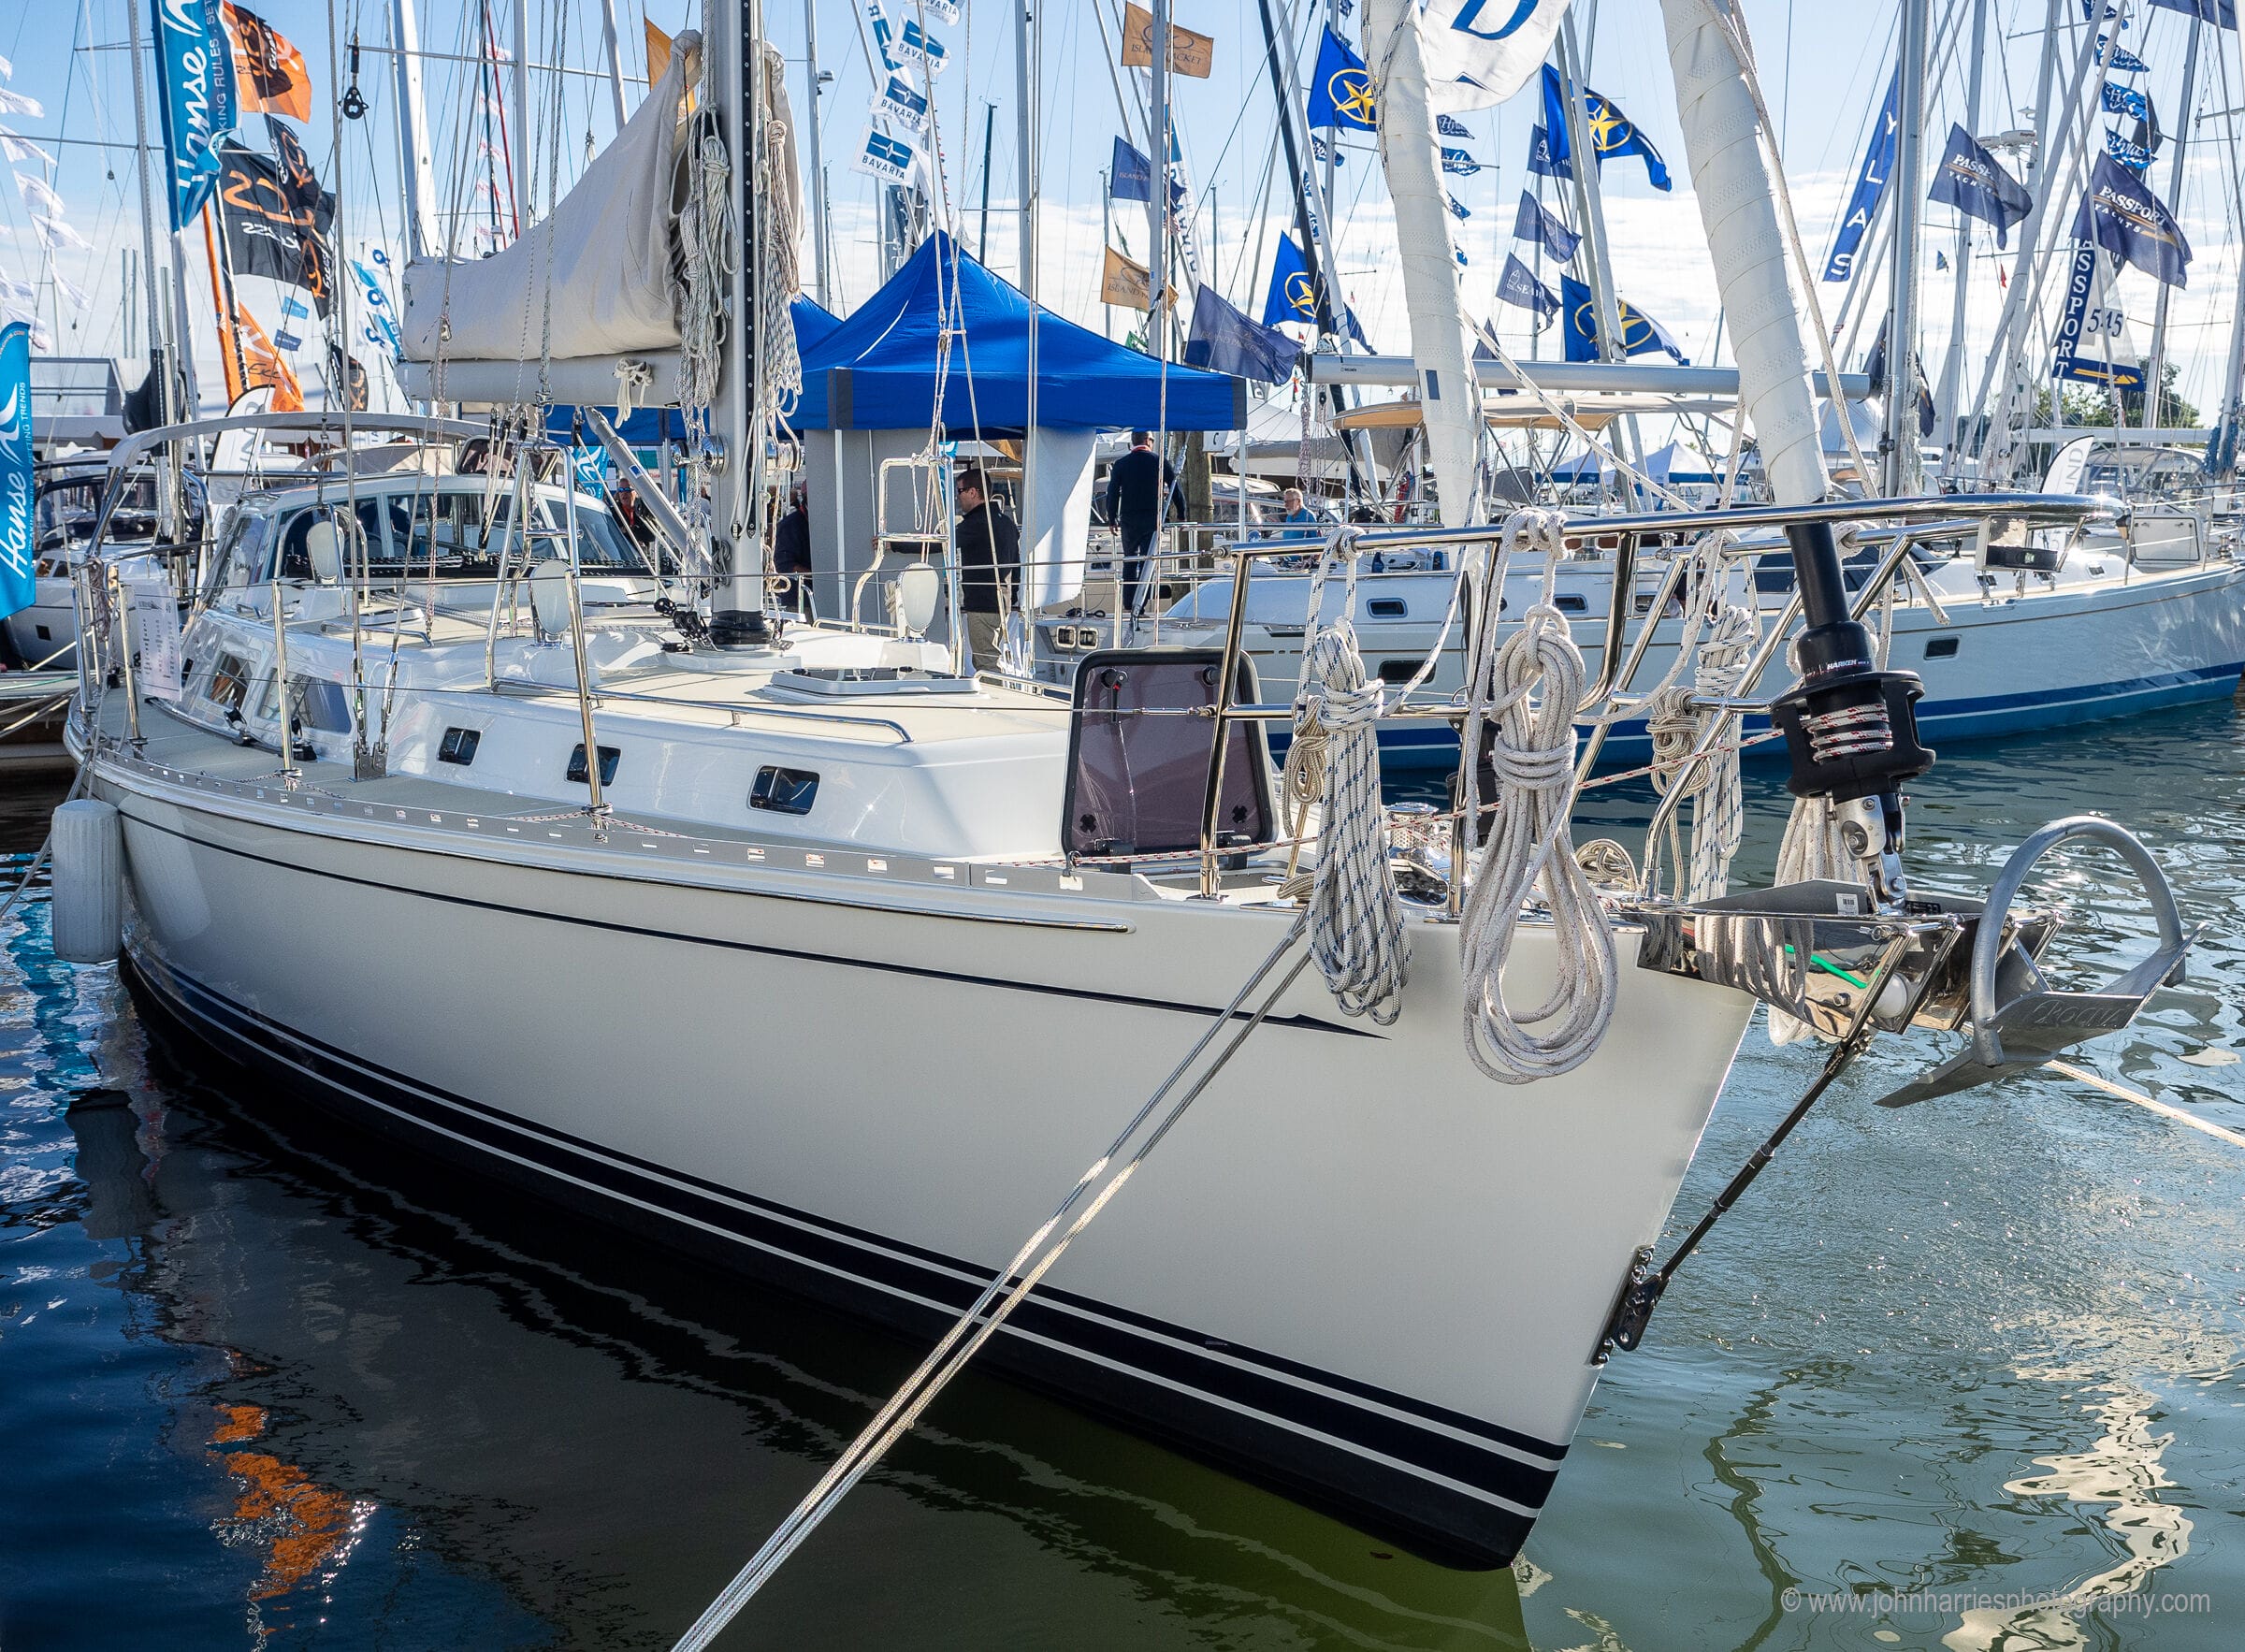 US Sailboat Show Report—Boats - Attainable Adventure Cruising